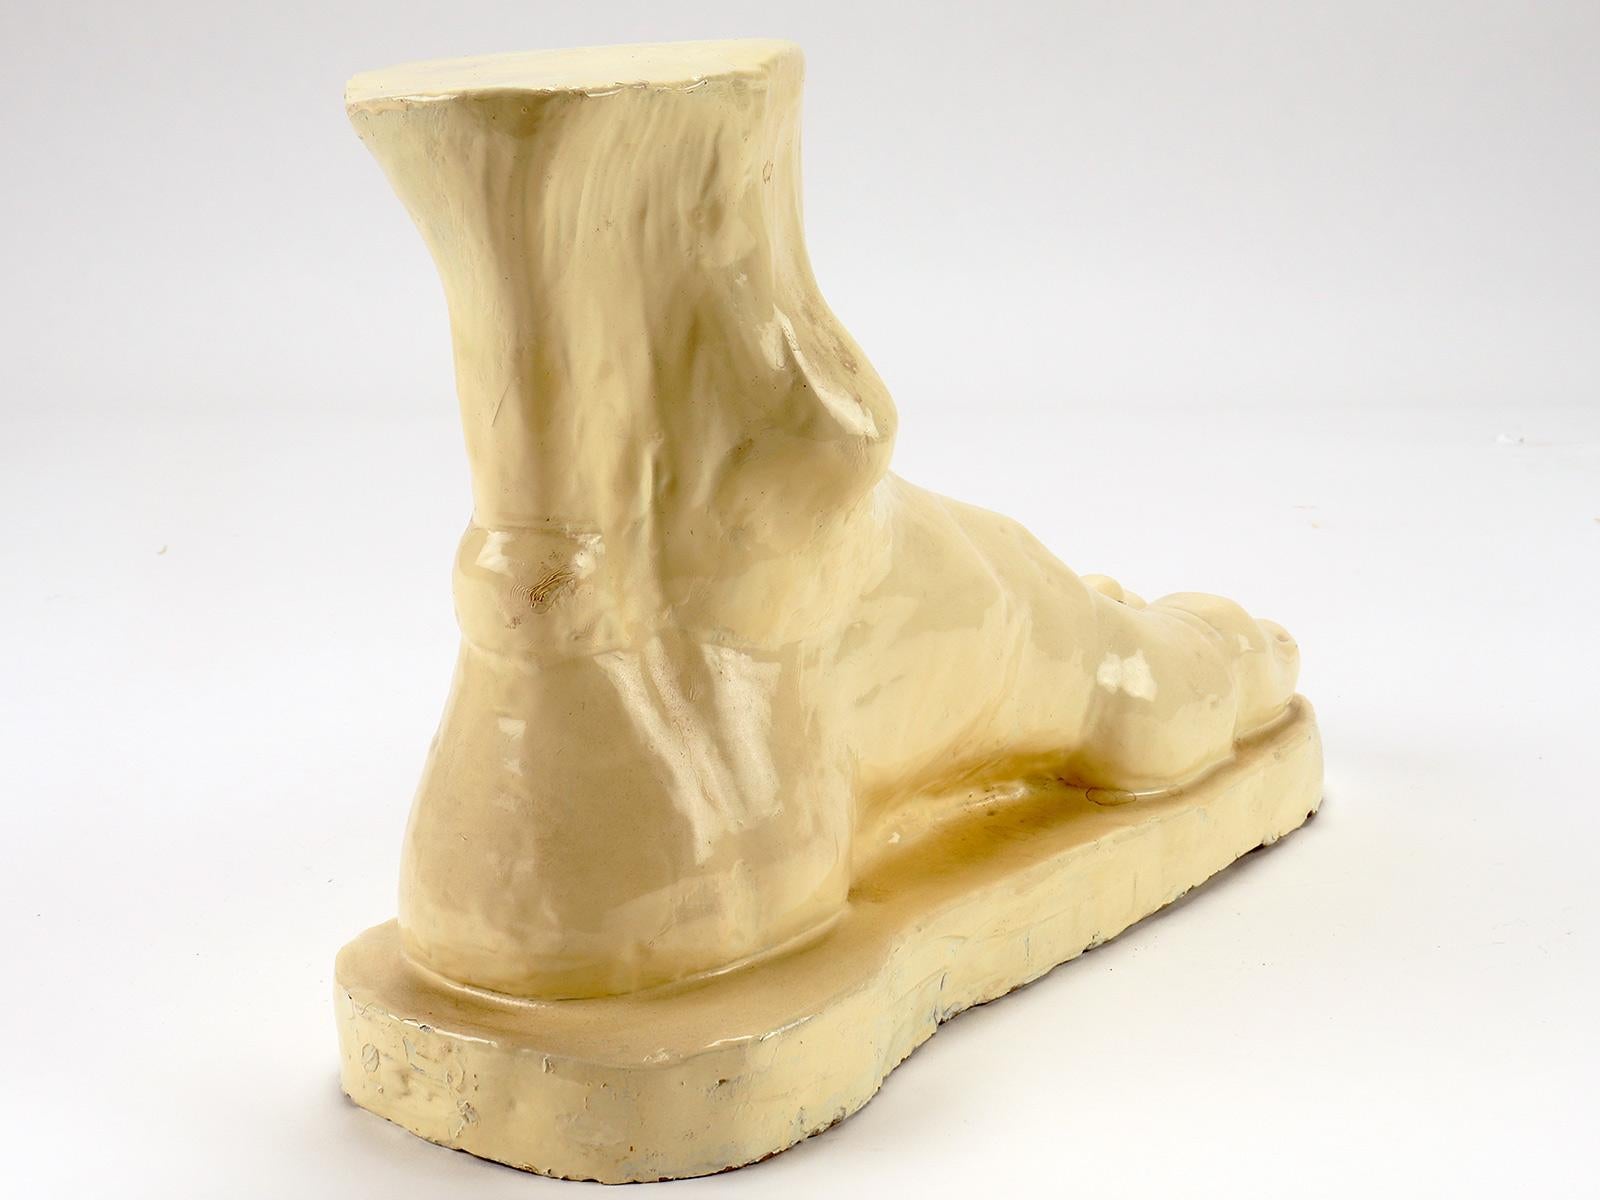 Glazed Clay Sculpture Depicting a Foot, Italy, 1900 For Sale 4